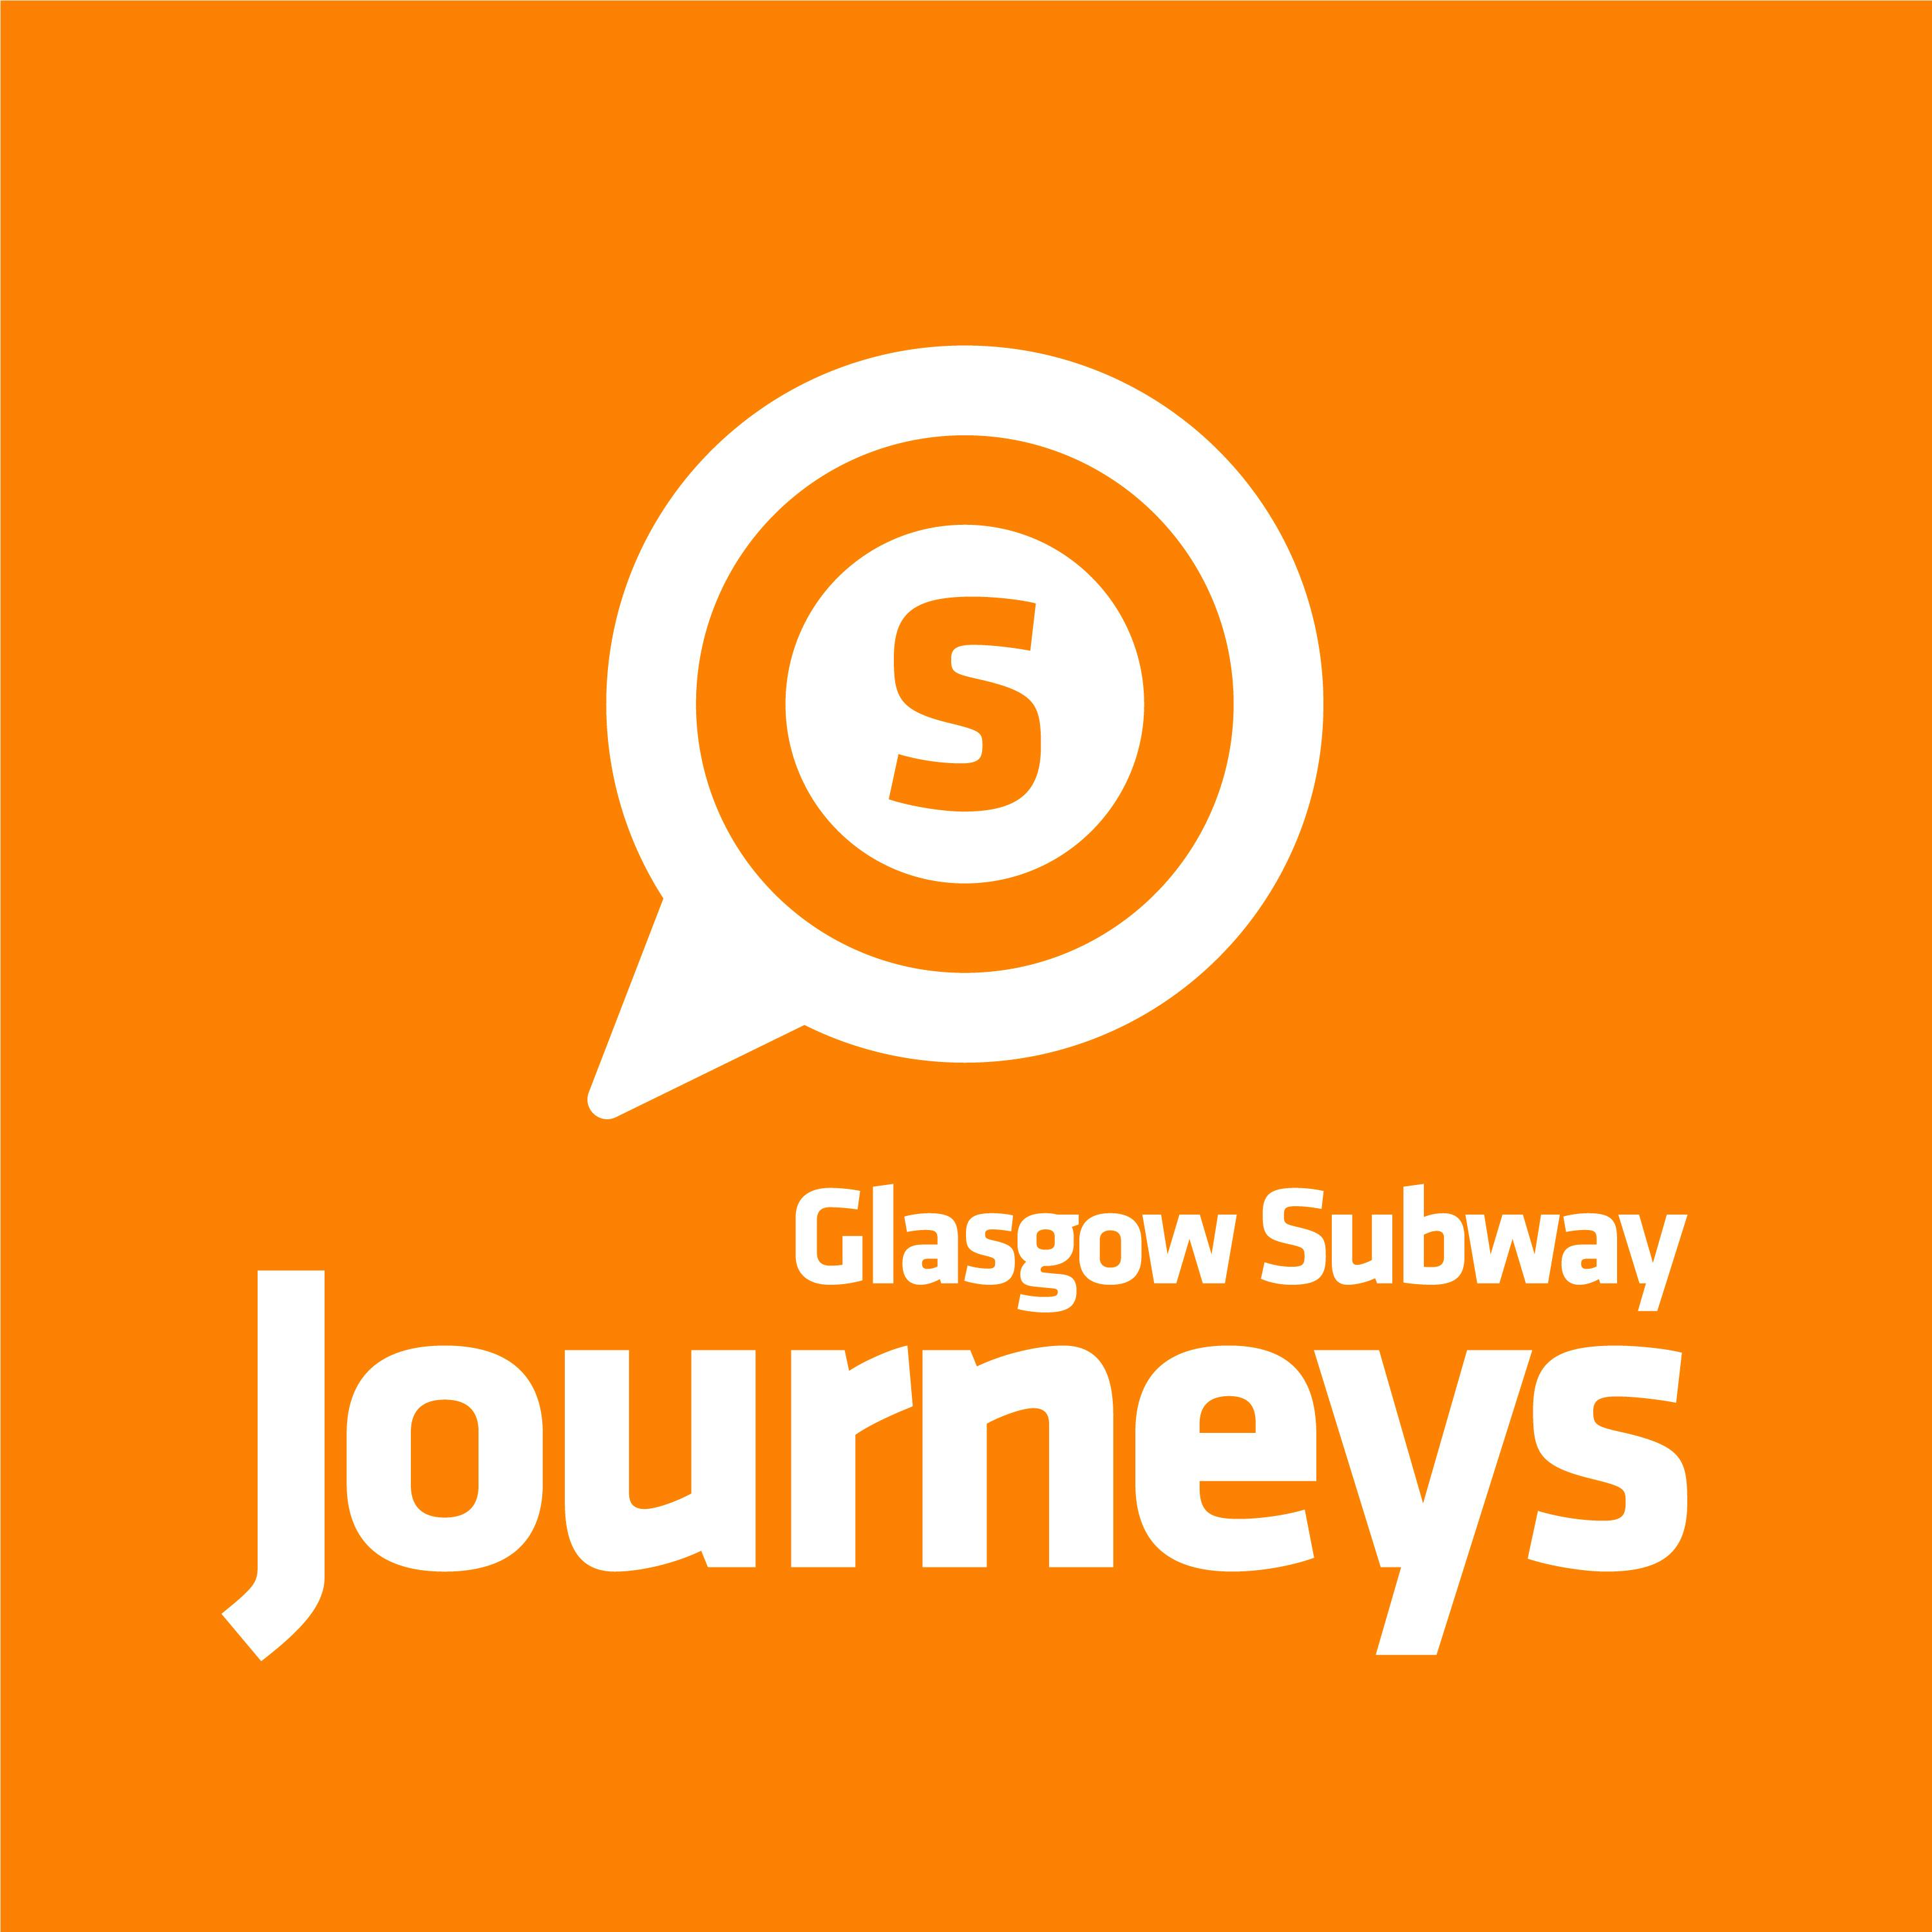 Glasgow Subway Today: The Technology